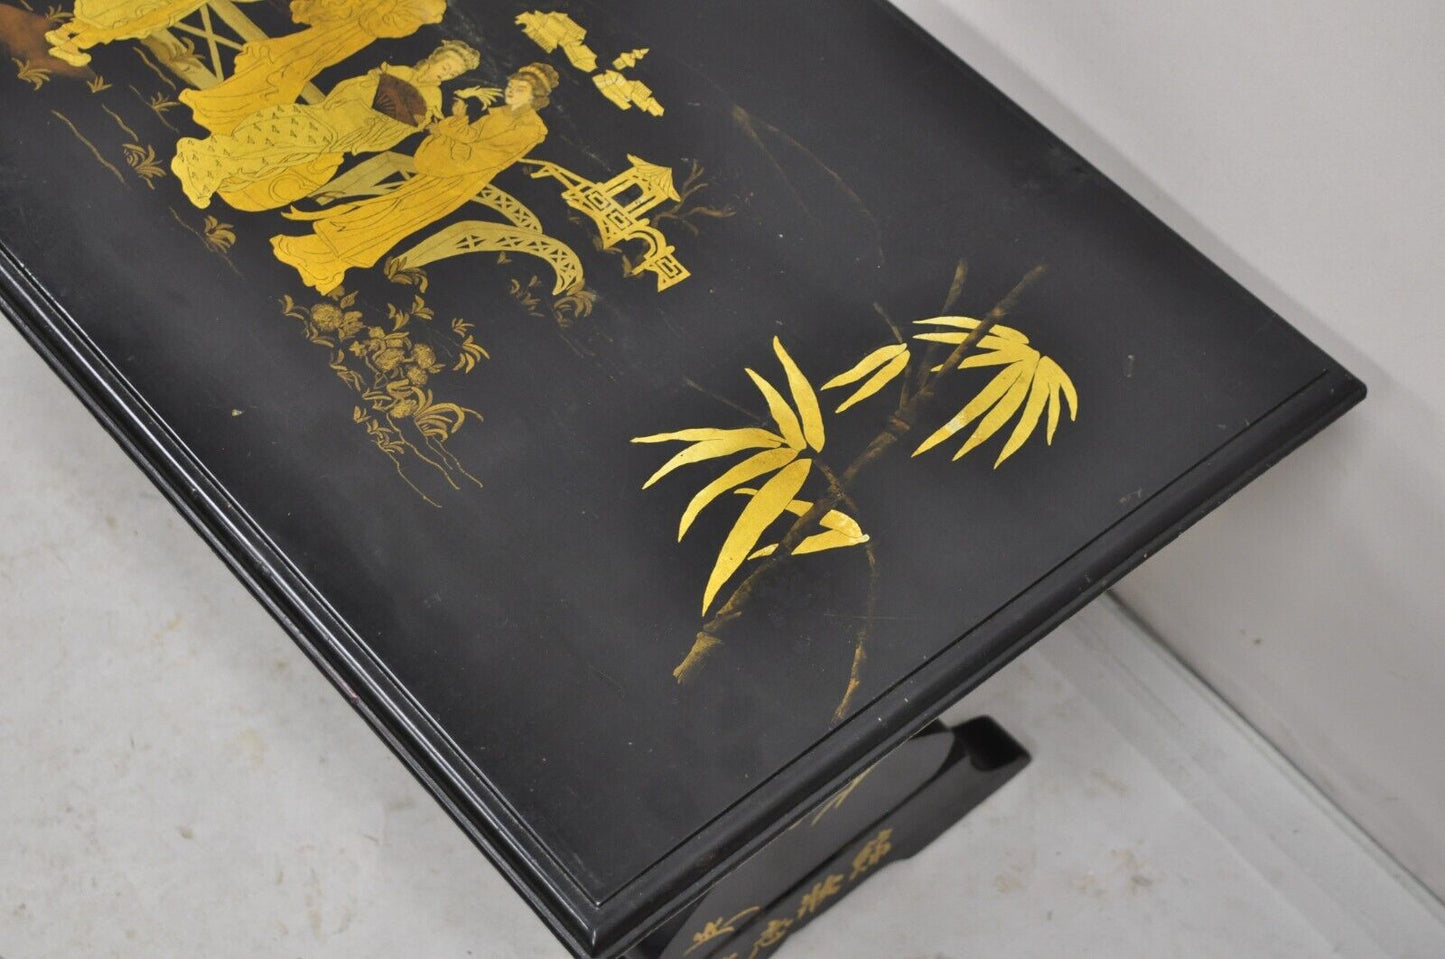 Vintage Chinoiserie Asian Inspired Black Painted Gold Gilt Trestle Coffee Table